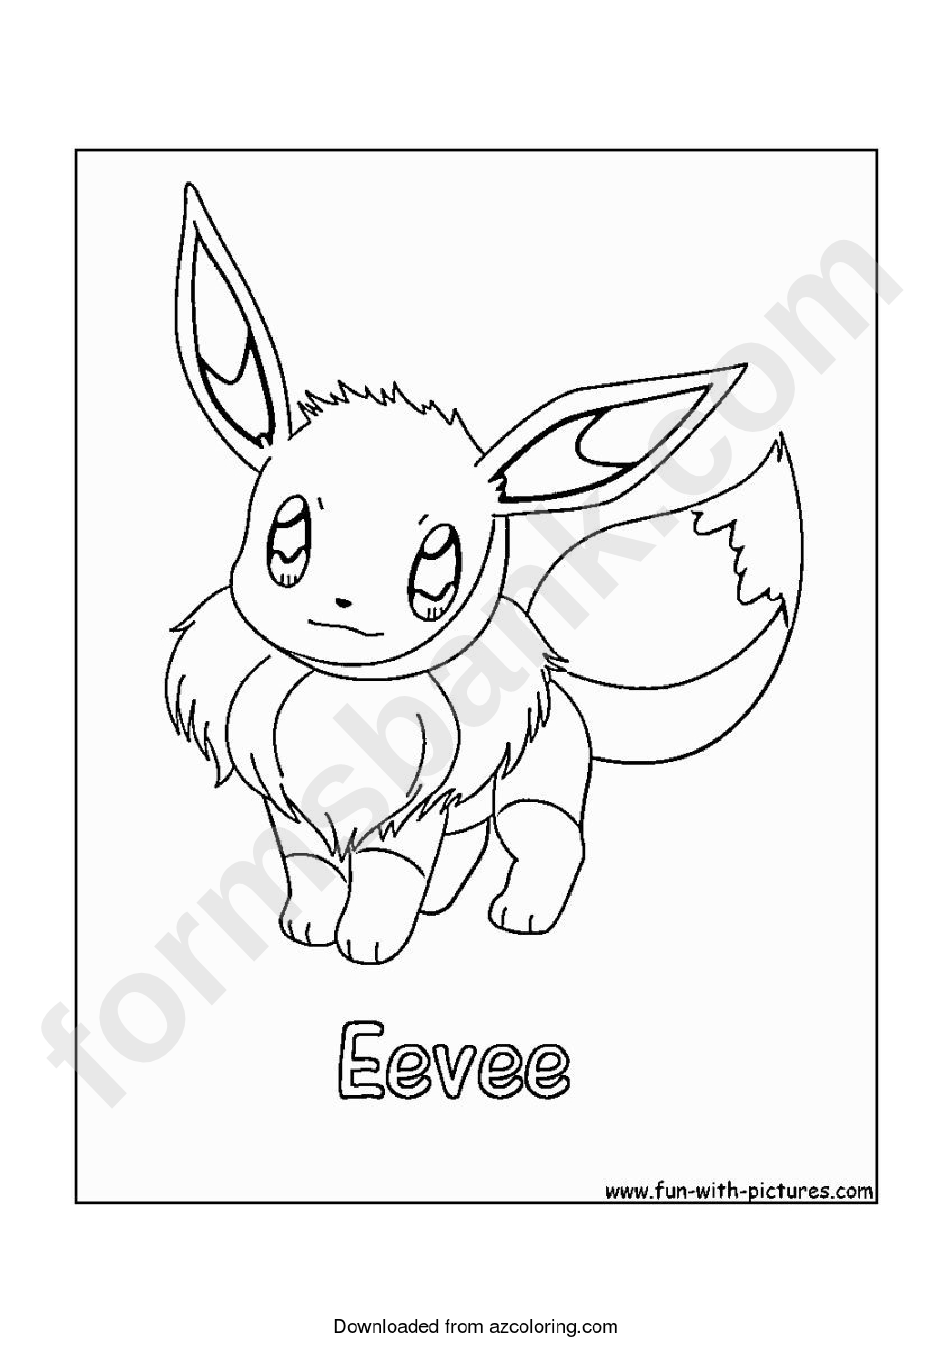 Featured image of post Pokemon Coloring Sheets Eevee / Coloring fun for all ages, adults and children.